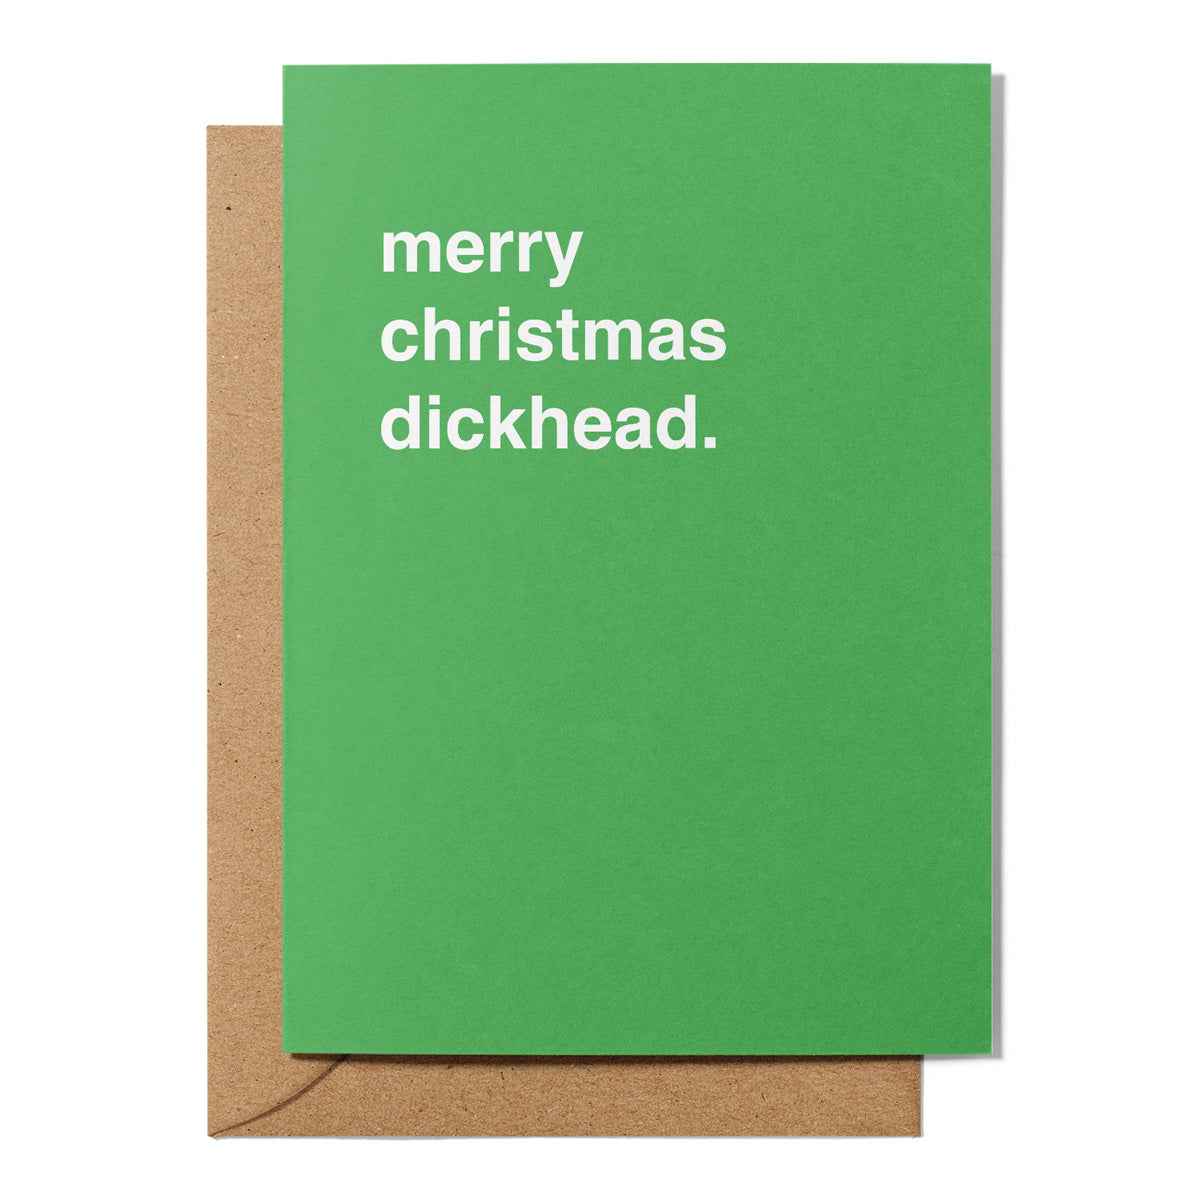 Merry Christmas Dickhead Christmas Card Greetings From Hell